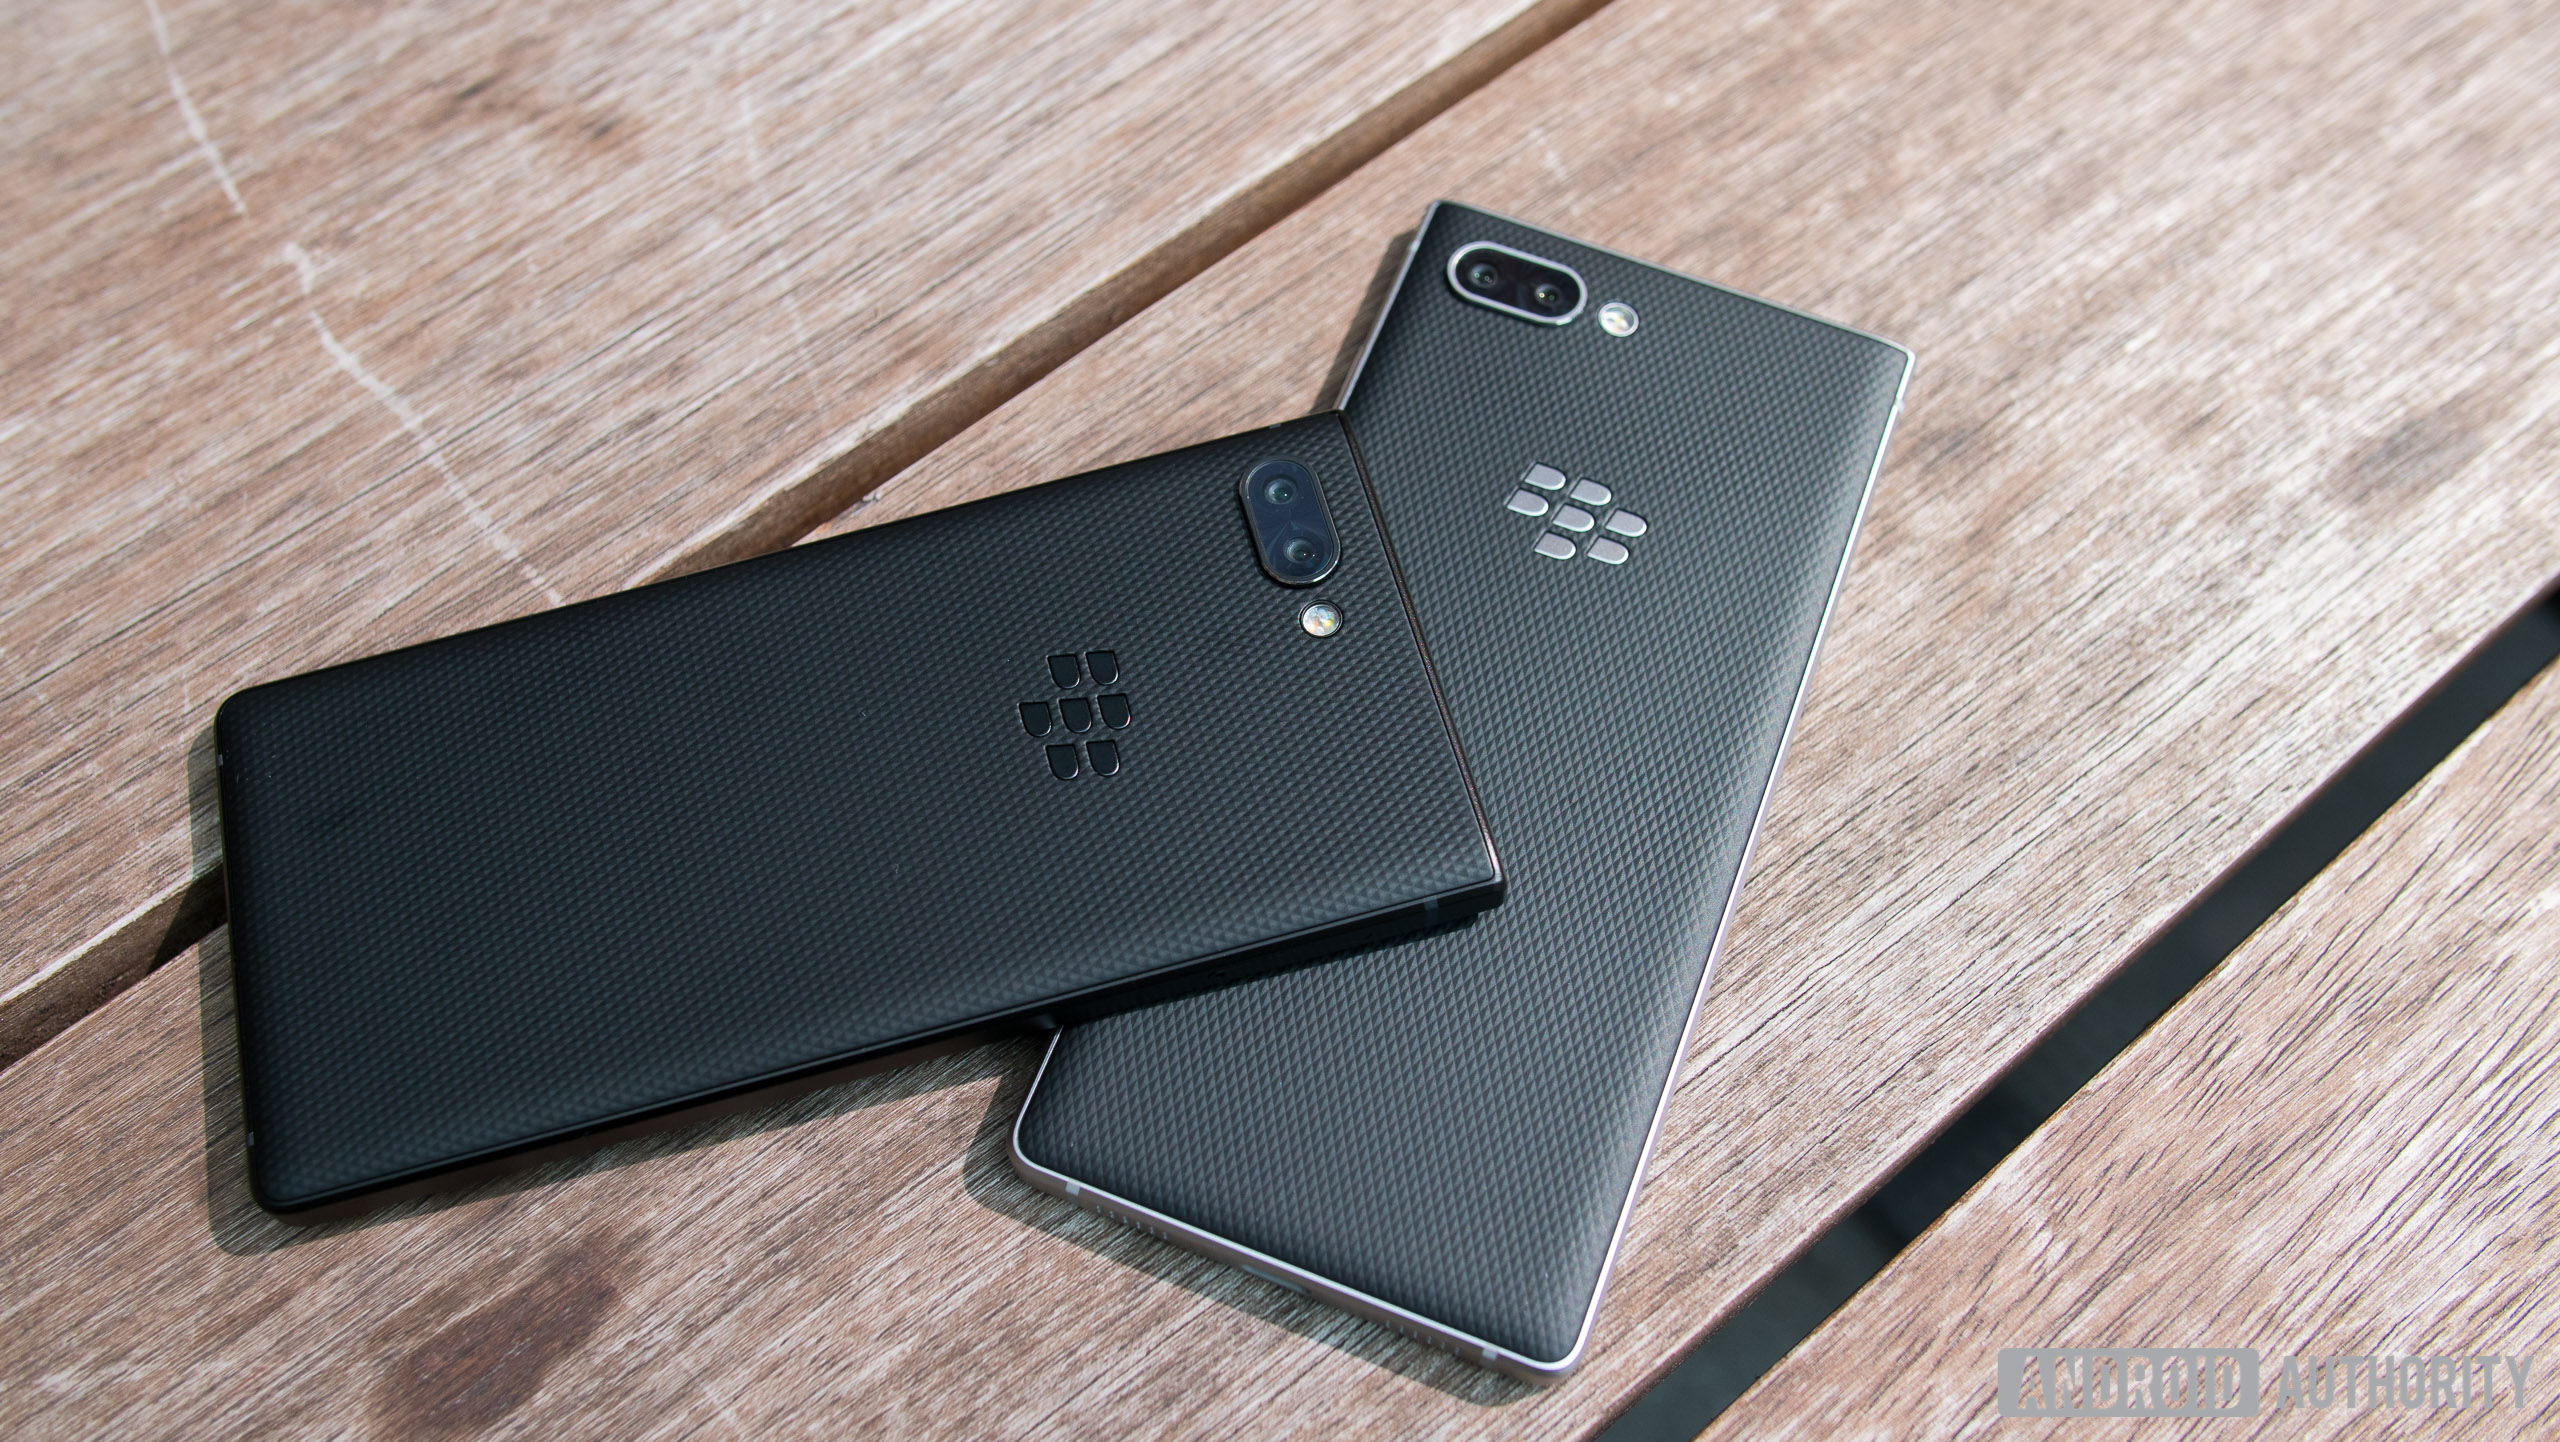 Blackberry Key2 will come in two color options, priced at $649.